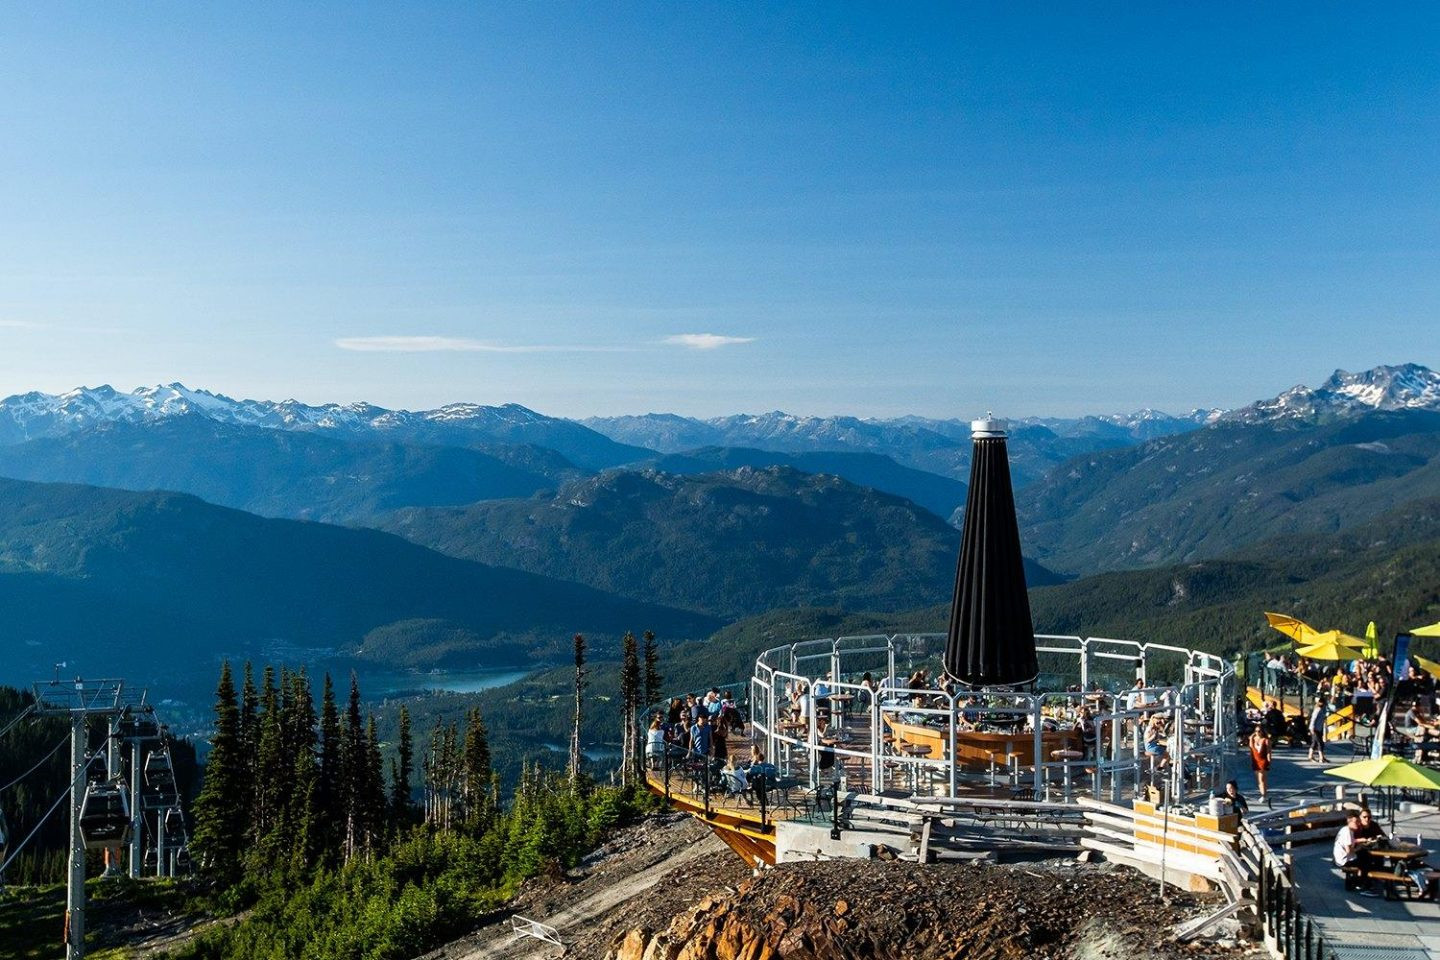 Whistler Summer Activities
 15 Fun Whistler Summer Activities to Get You Excited for